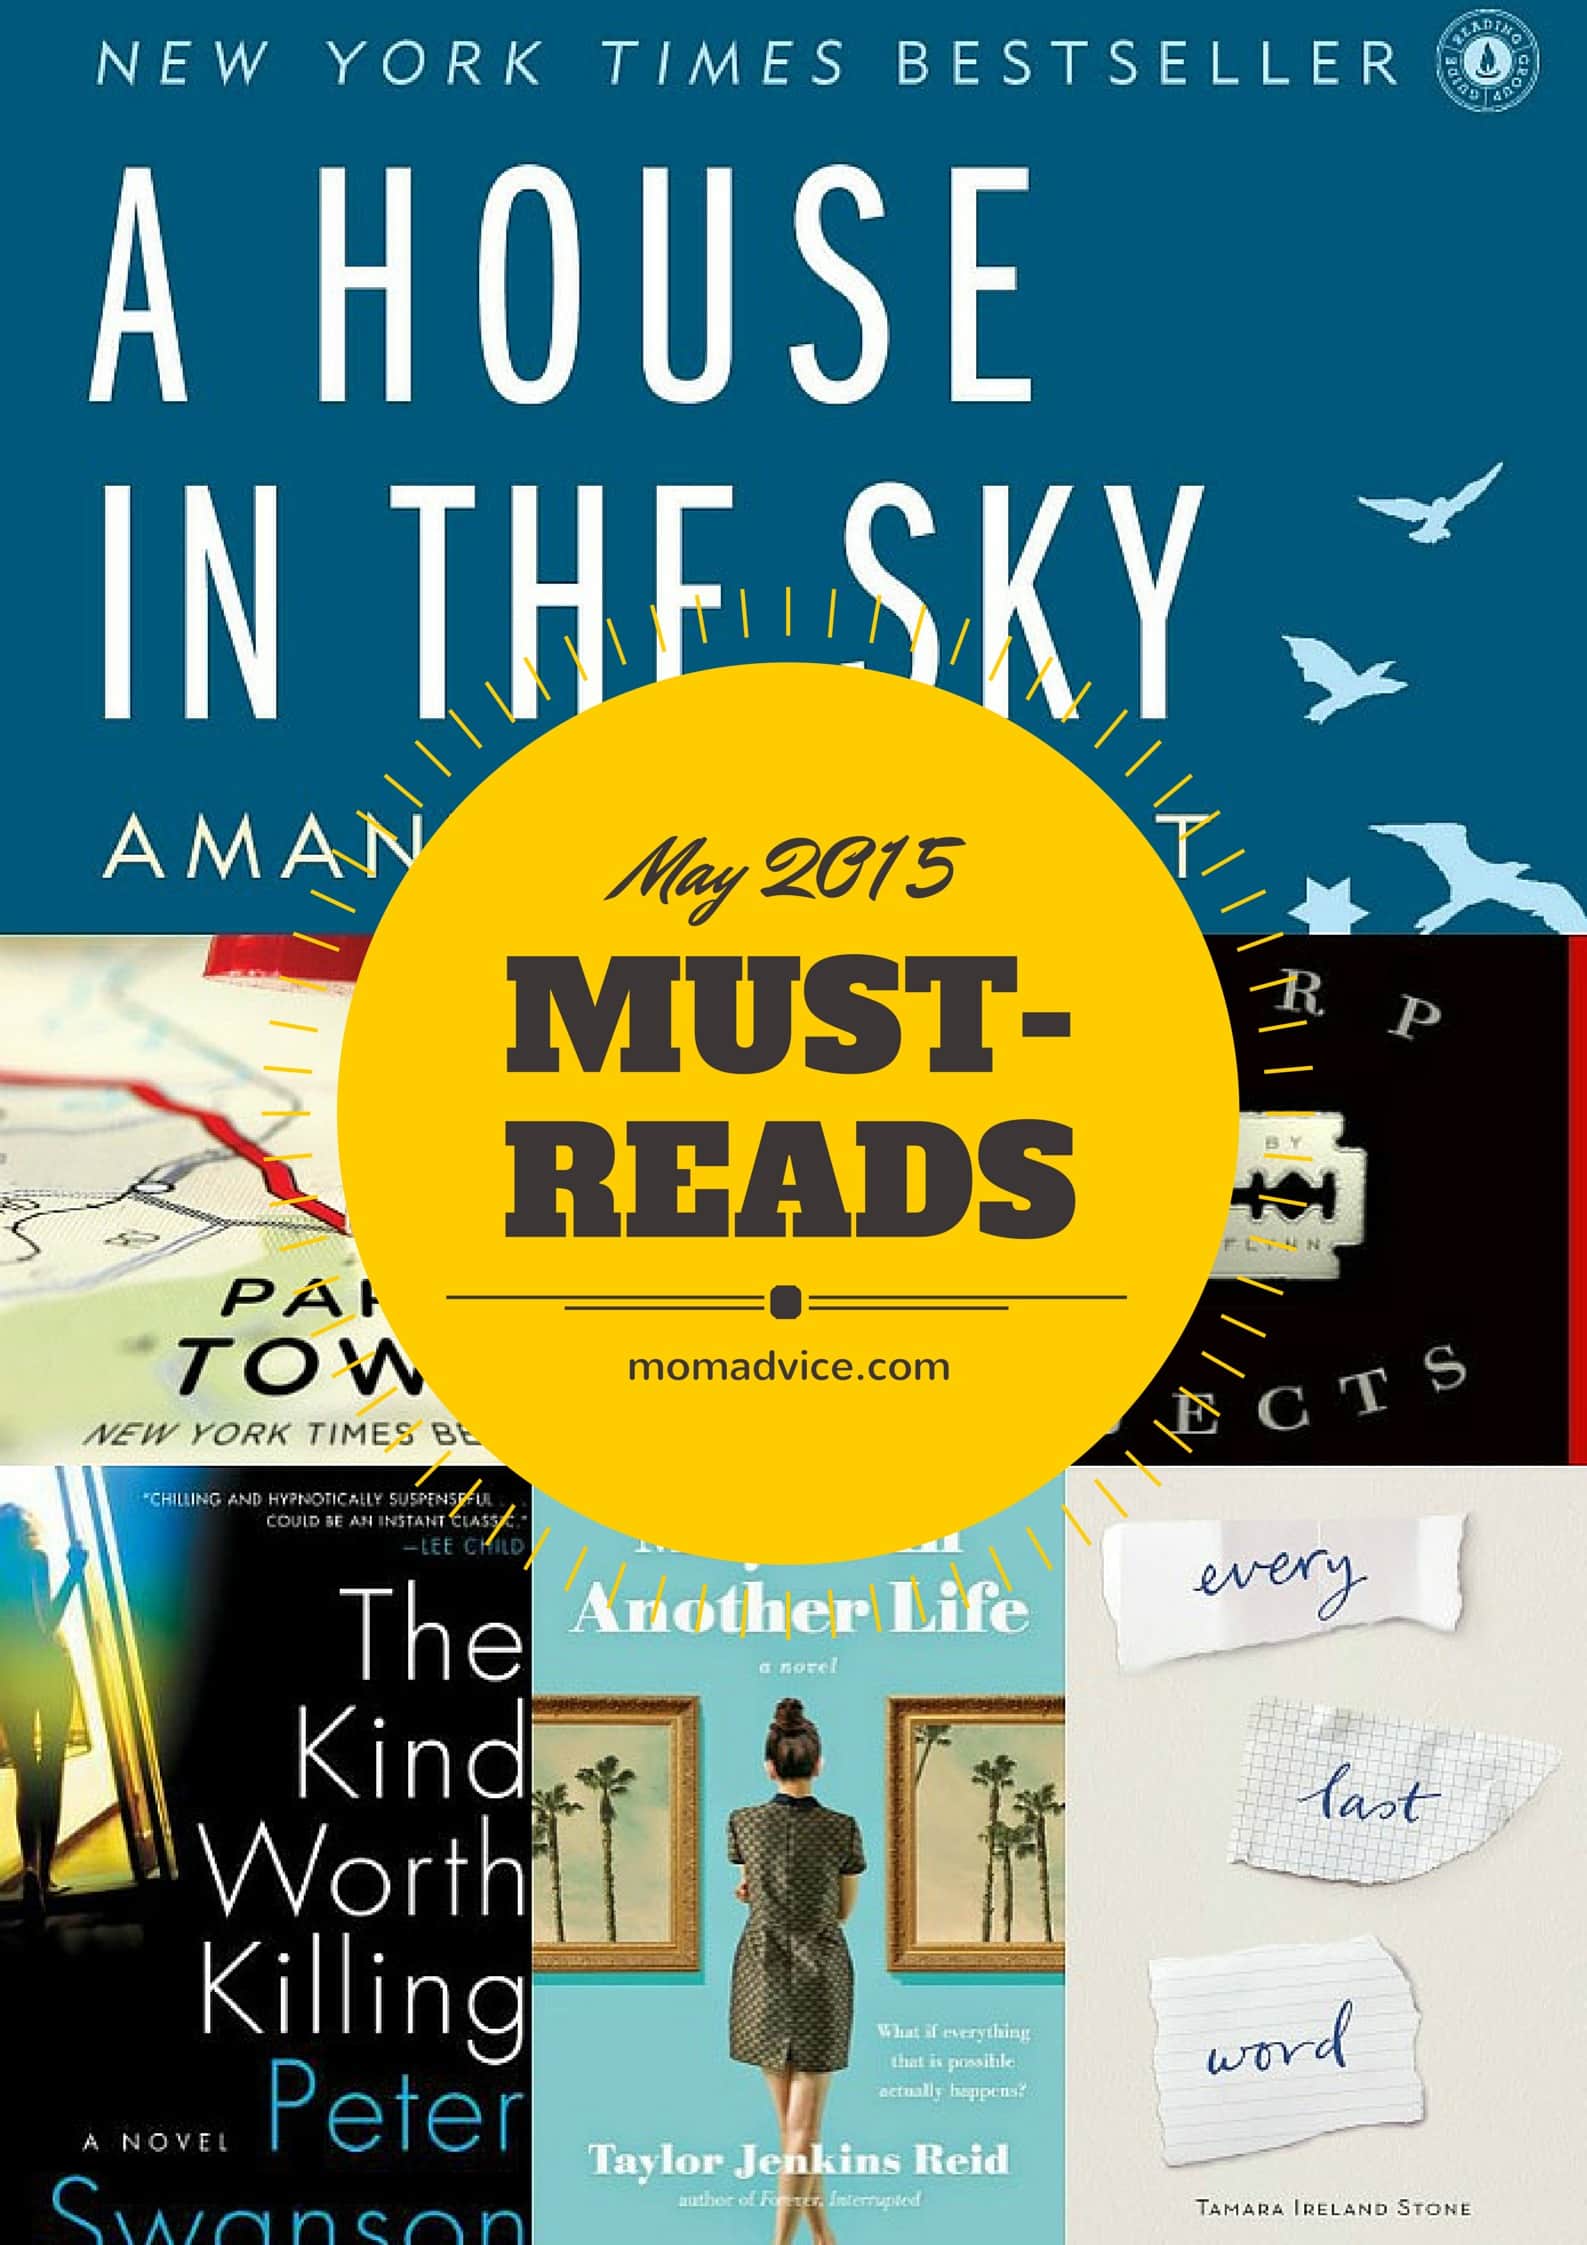 May 2015 Must-Reads